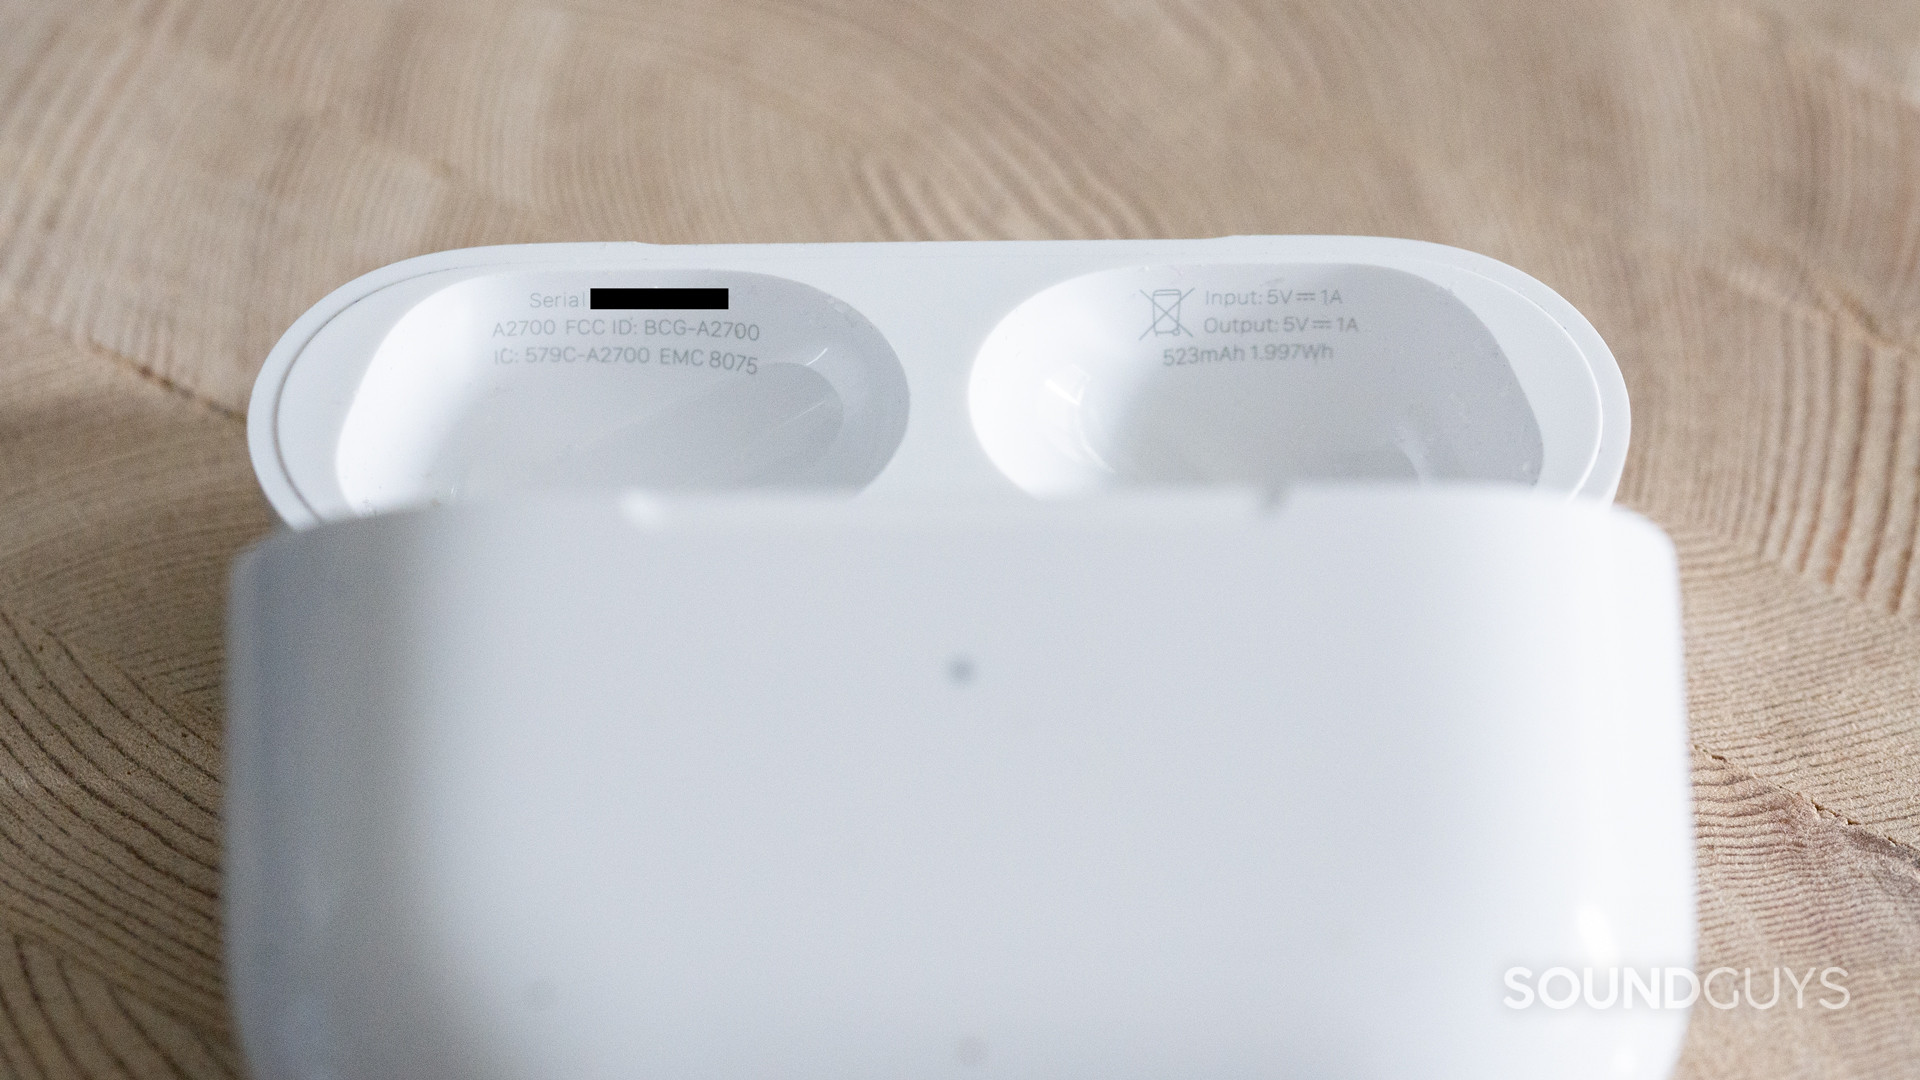 A photo of the AirPods Pro case with the serial number blacked out.